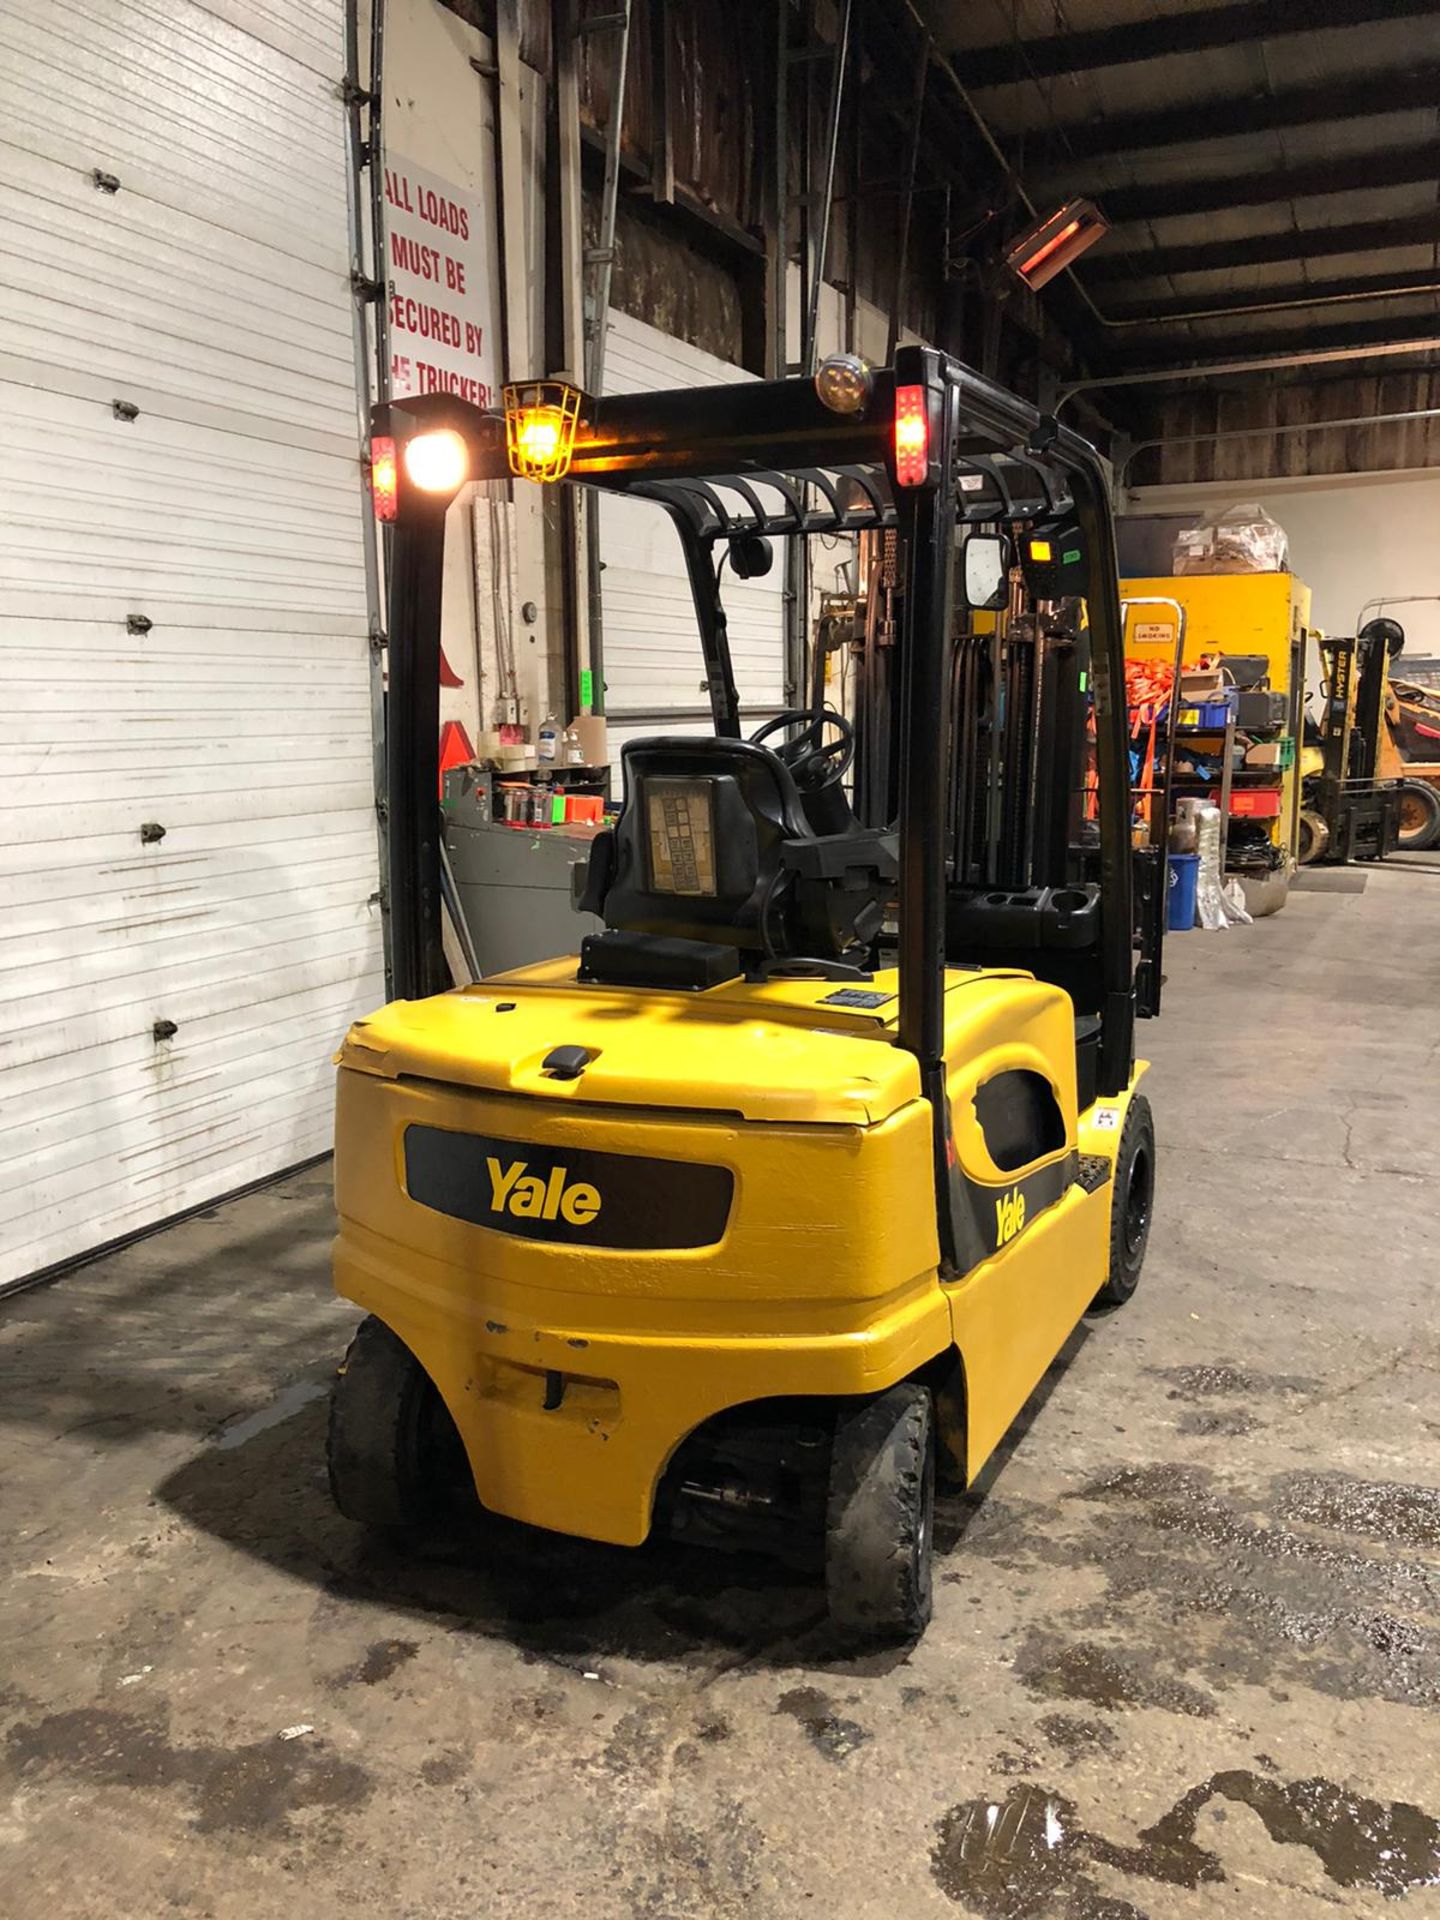 MINT 2019 Yale 6,000lbs Capacity Forklift INDOOR / OUTDOOR Electric 80V with Sideshift - Image 3 of 6